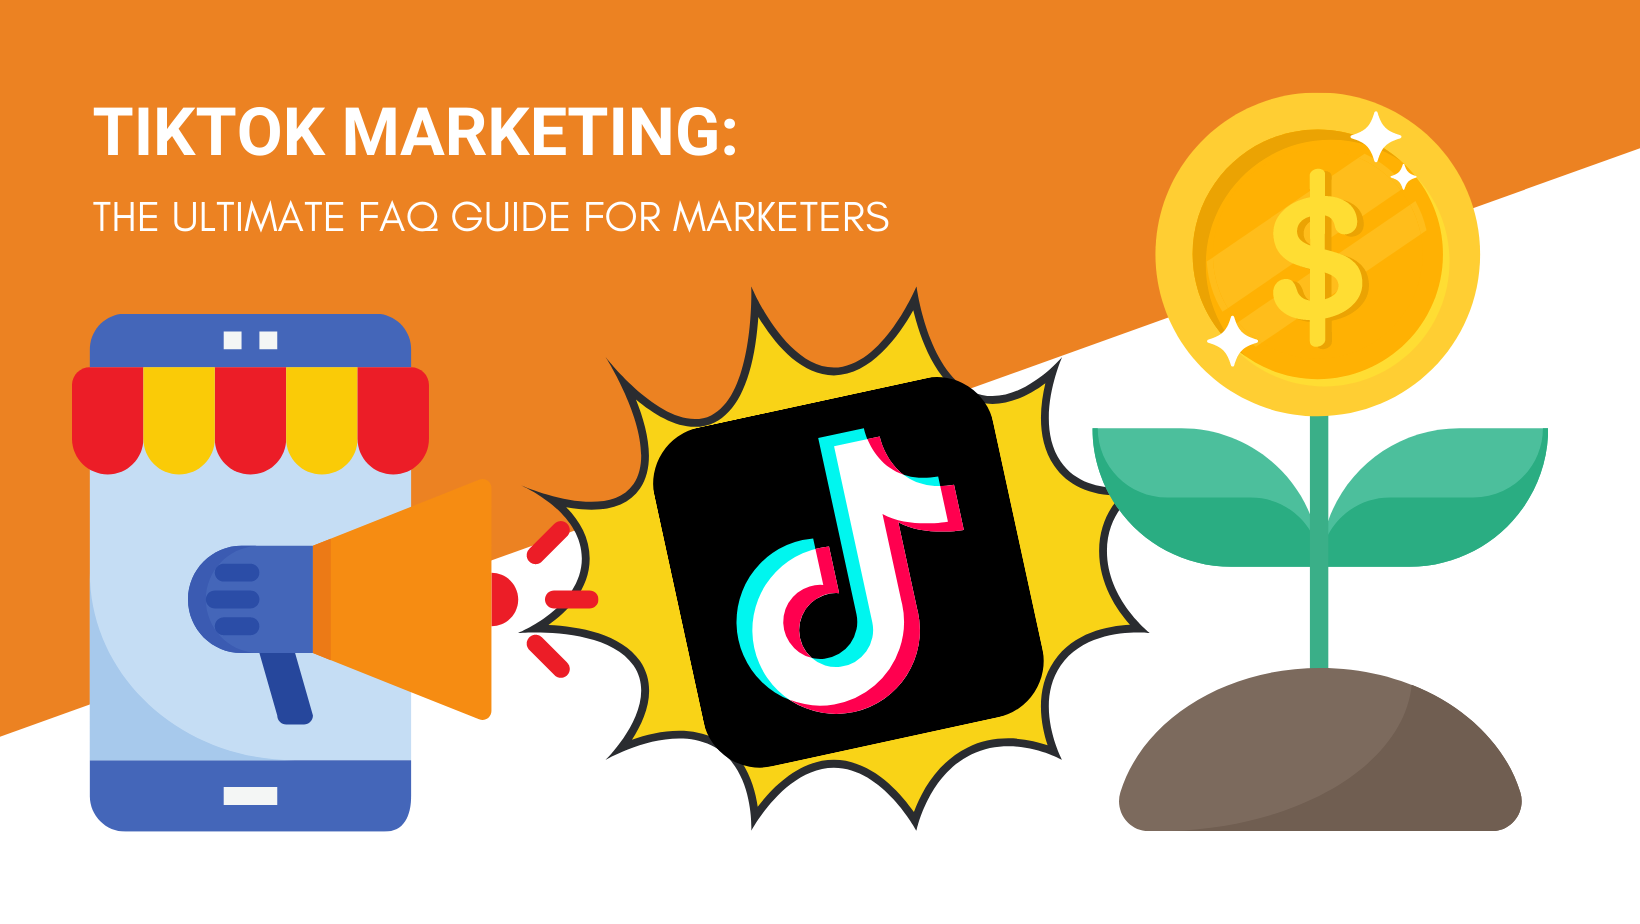 TIKTOK MARKETING THE ULTIMATE FAQ GUIDE FOR MARKETERS